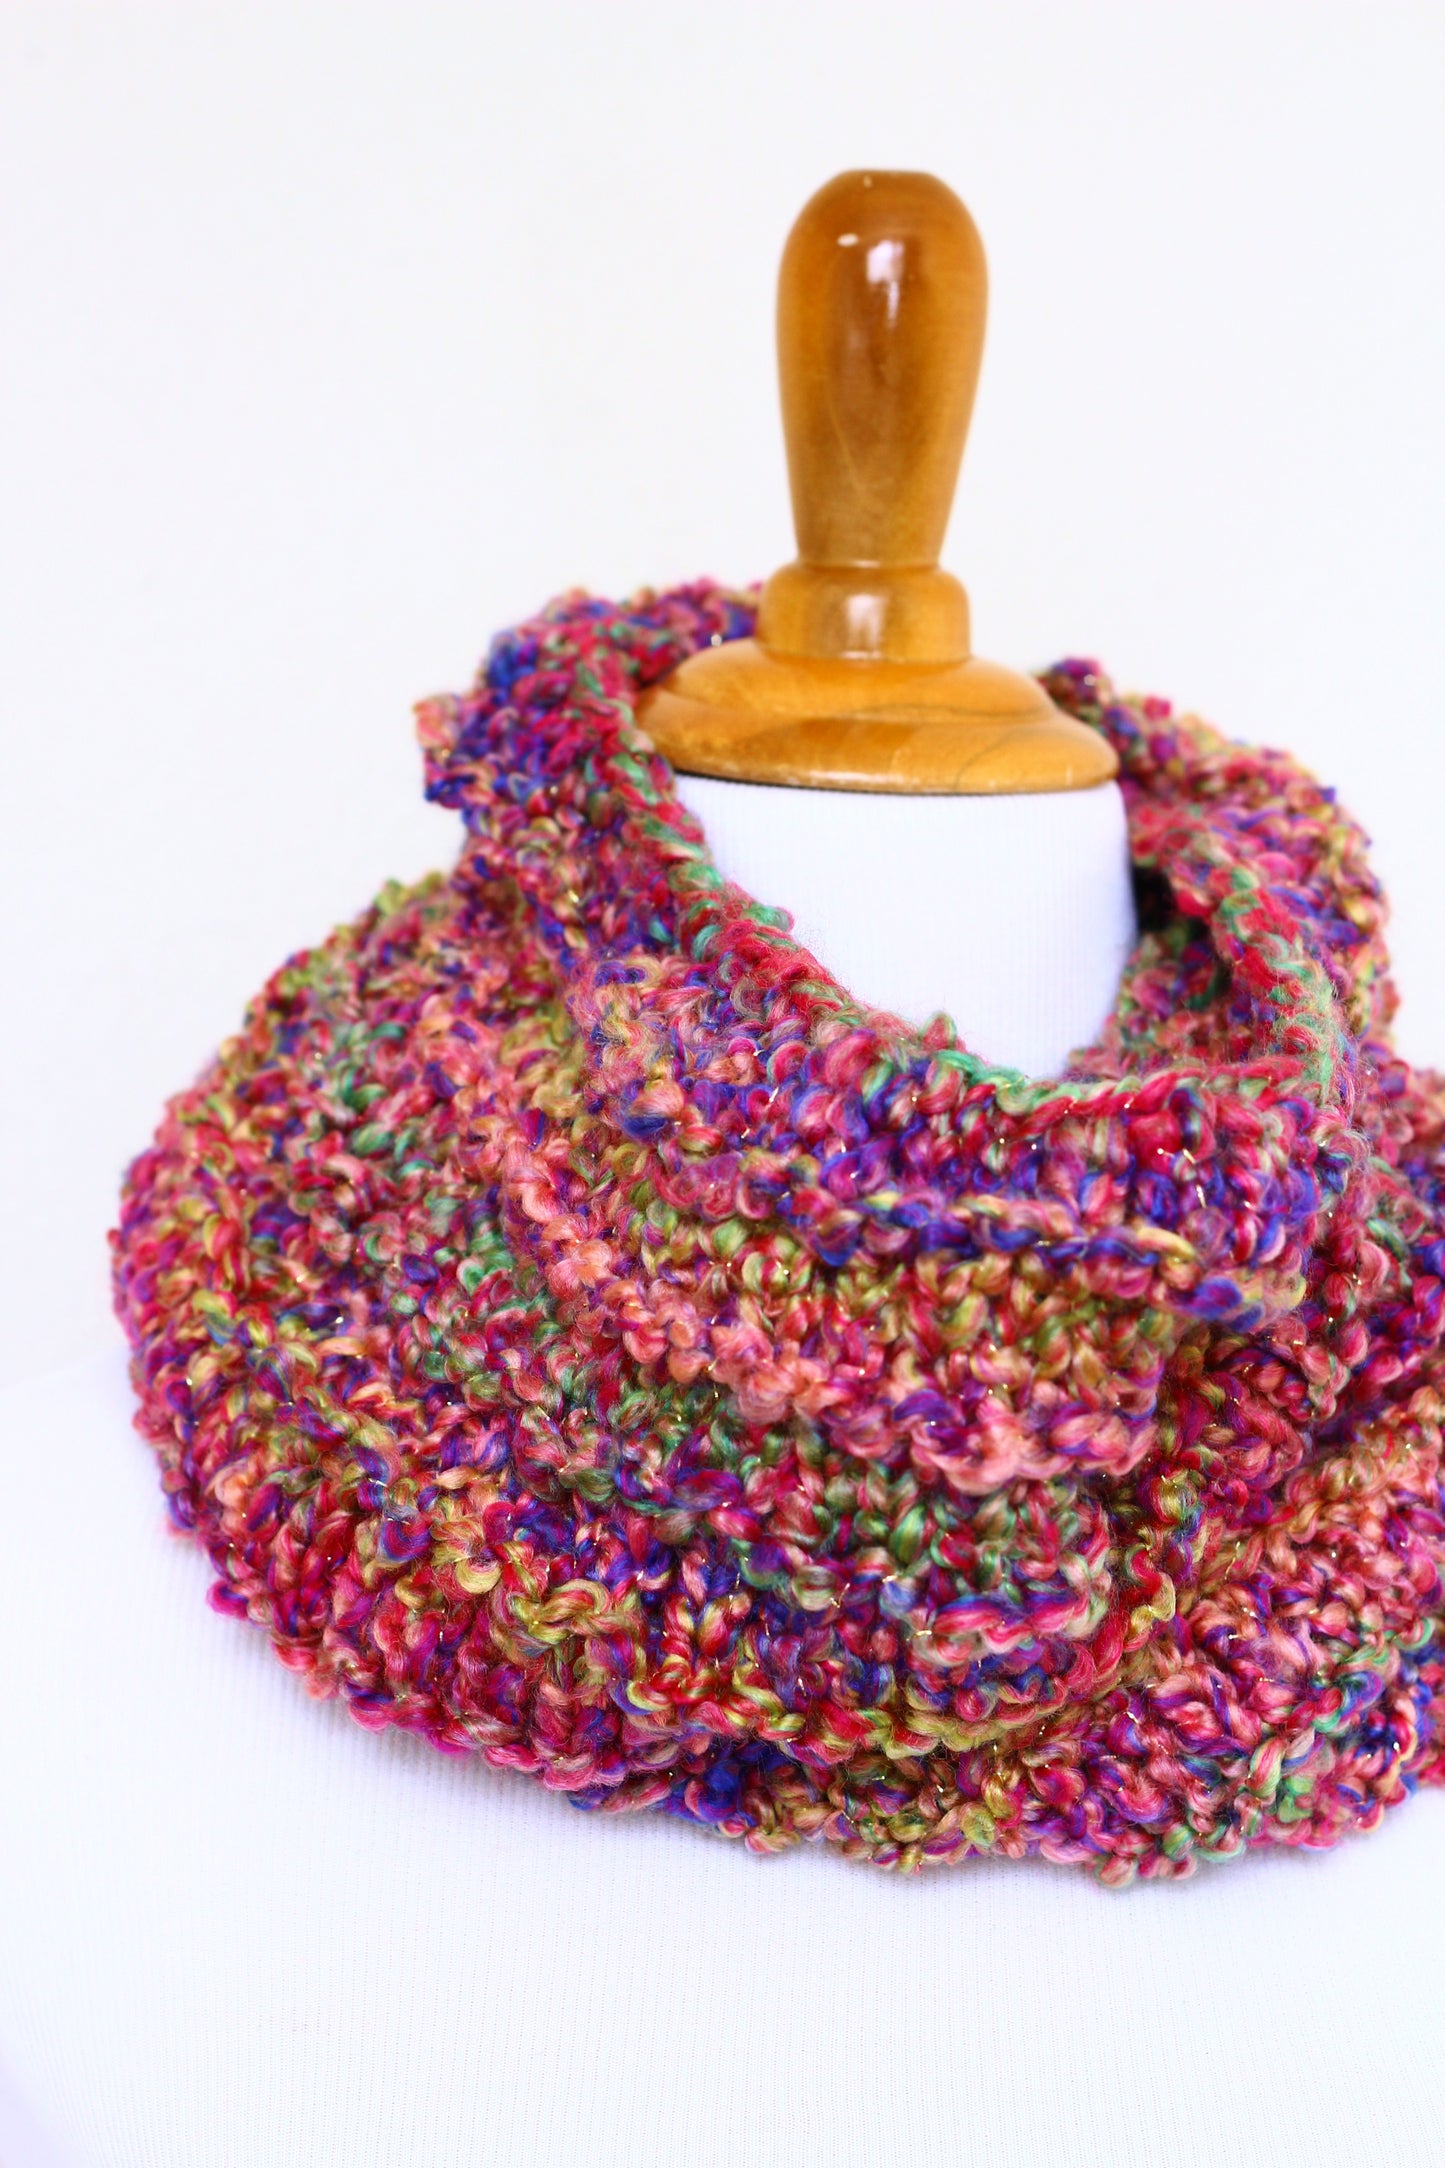 Crochet cowl in red and purple colors, chunky infinity scarf - 3 colorways available